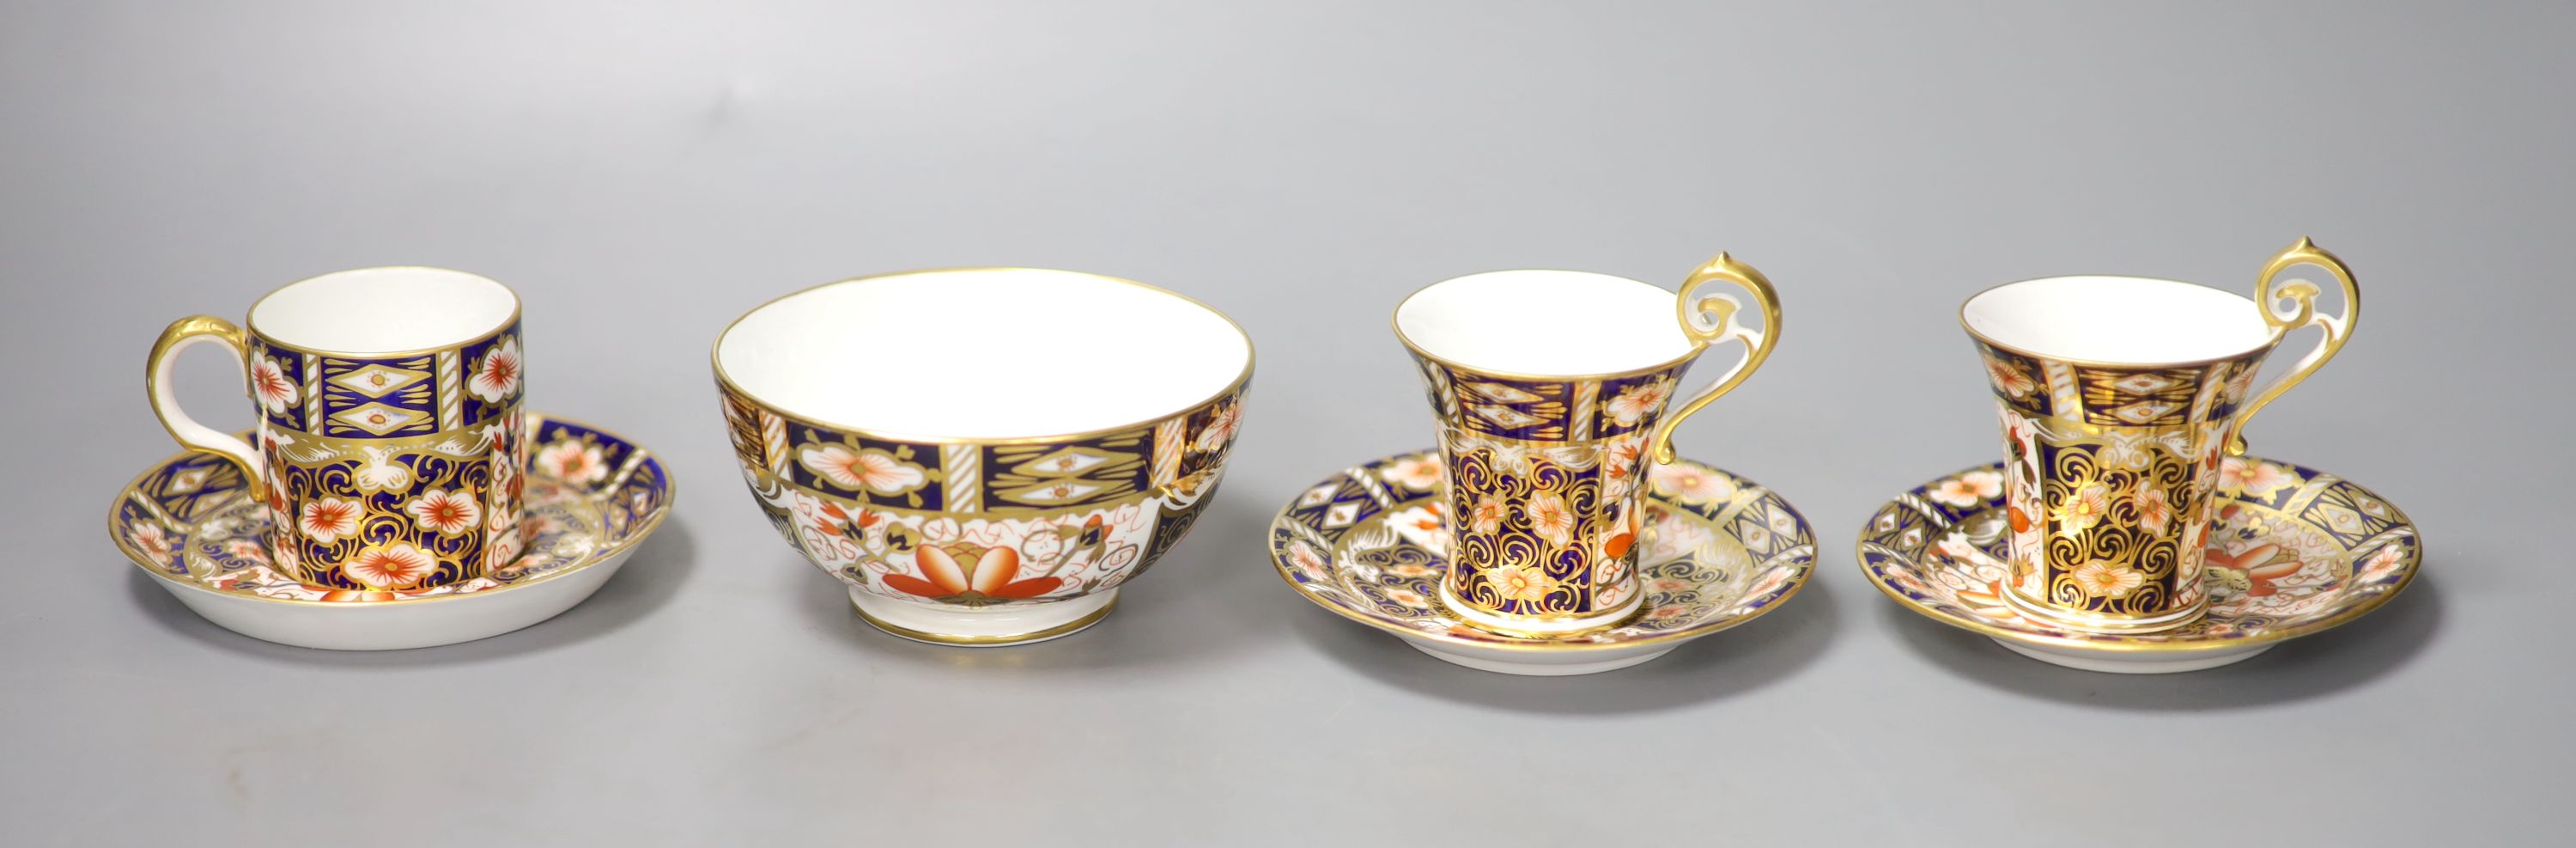 A pair of Royal Crown Derby coffee cups, imari pattern 2451, a coffee can and saucer and a sugar